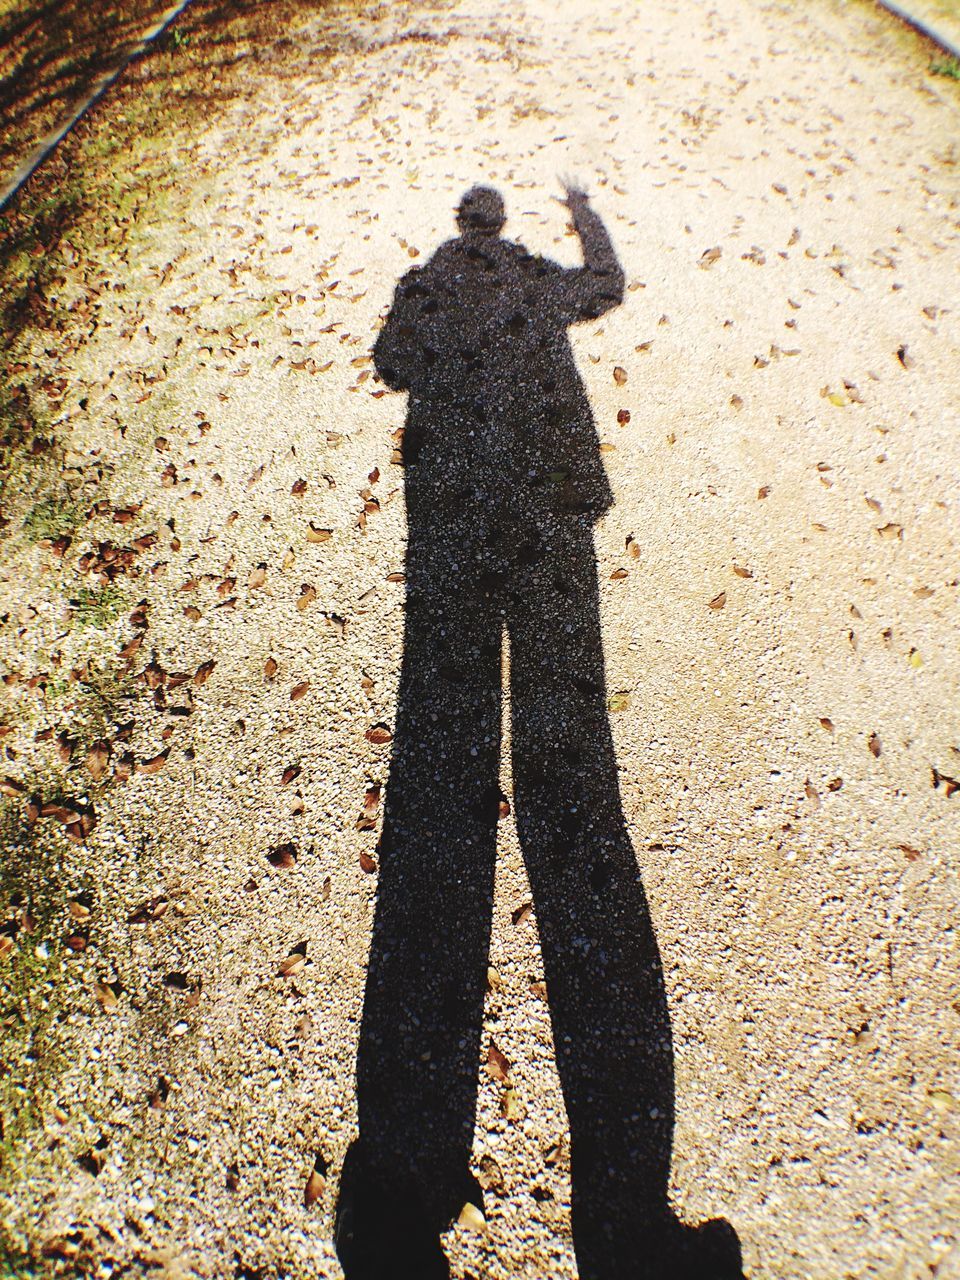 SHADOW OF MAN ON ROAD